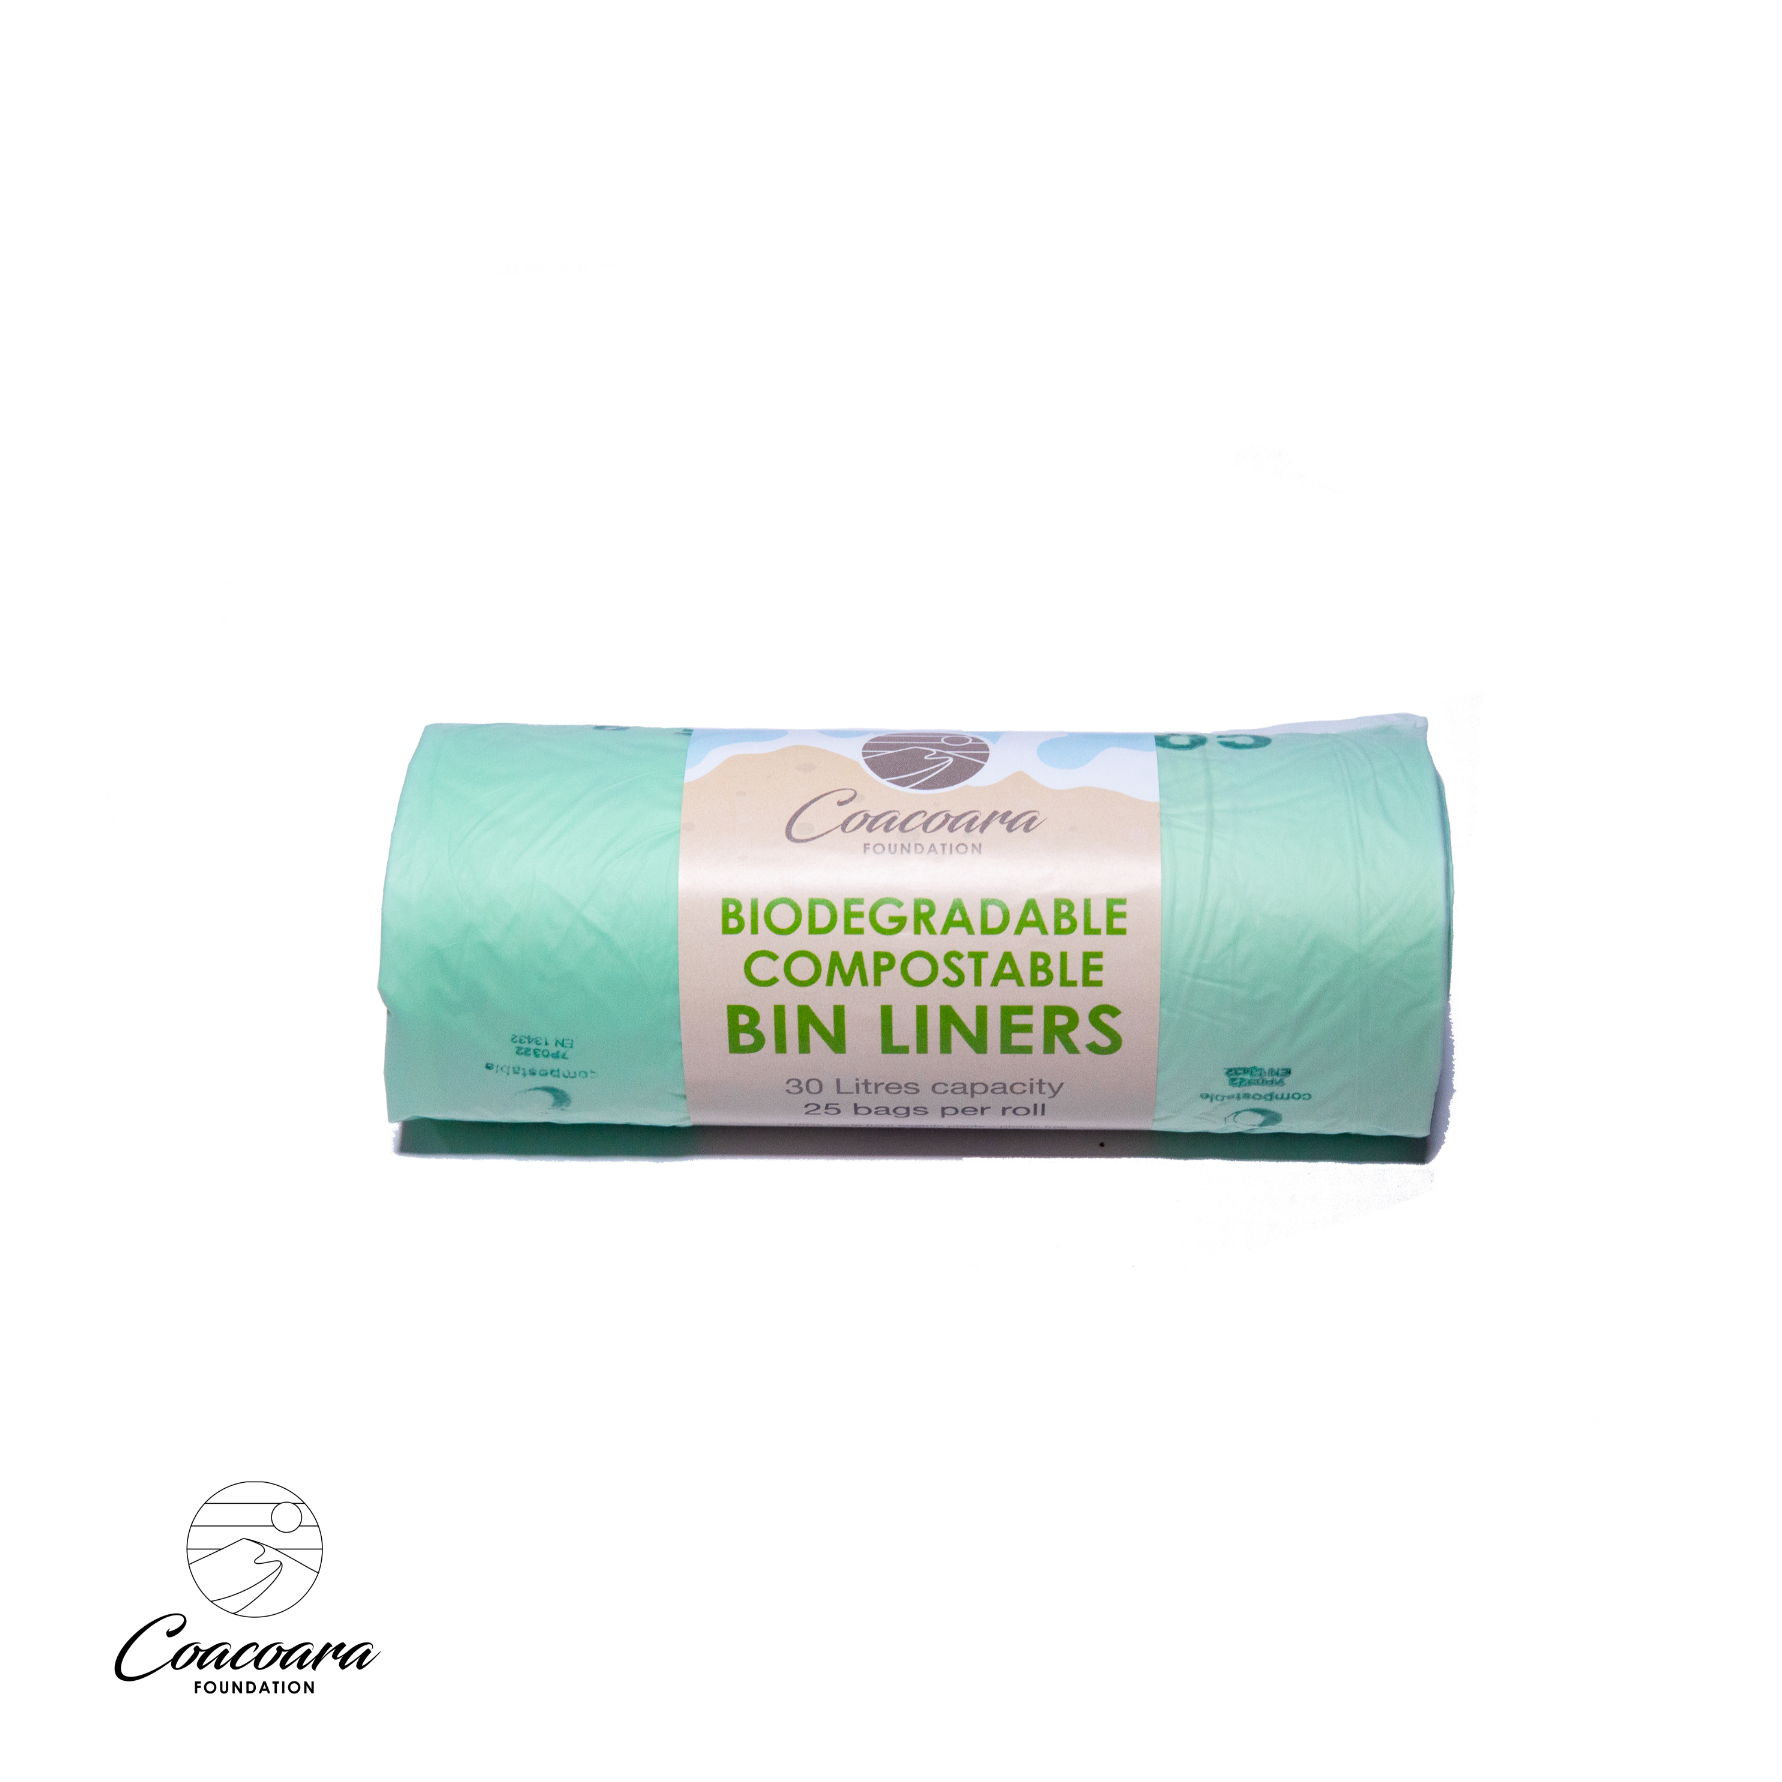 Biodegradable Compostable Bin Liners 30 litres